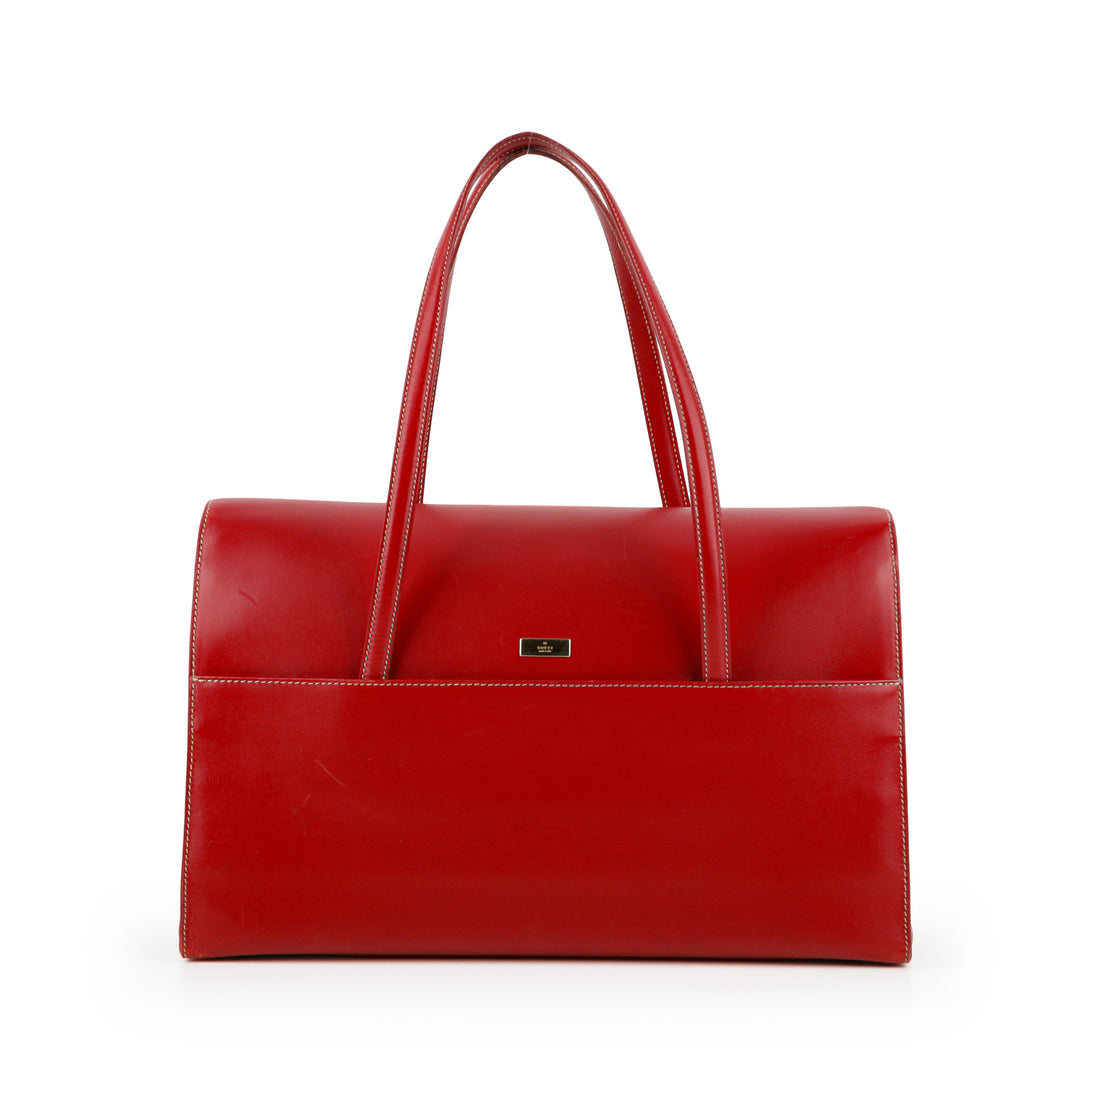 GUCCI Lady Lock Flap Tote - Red Leather